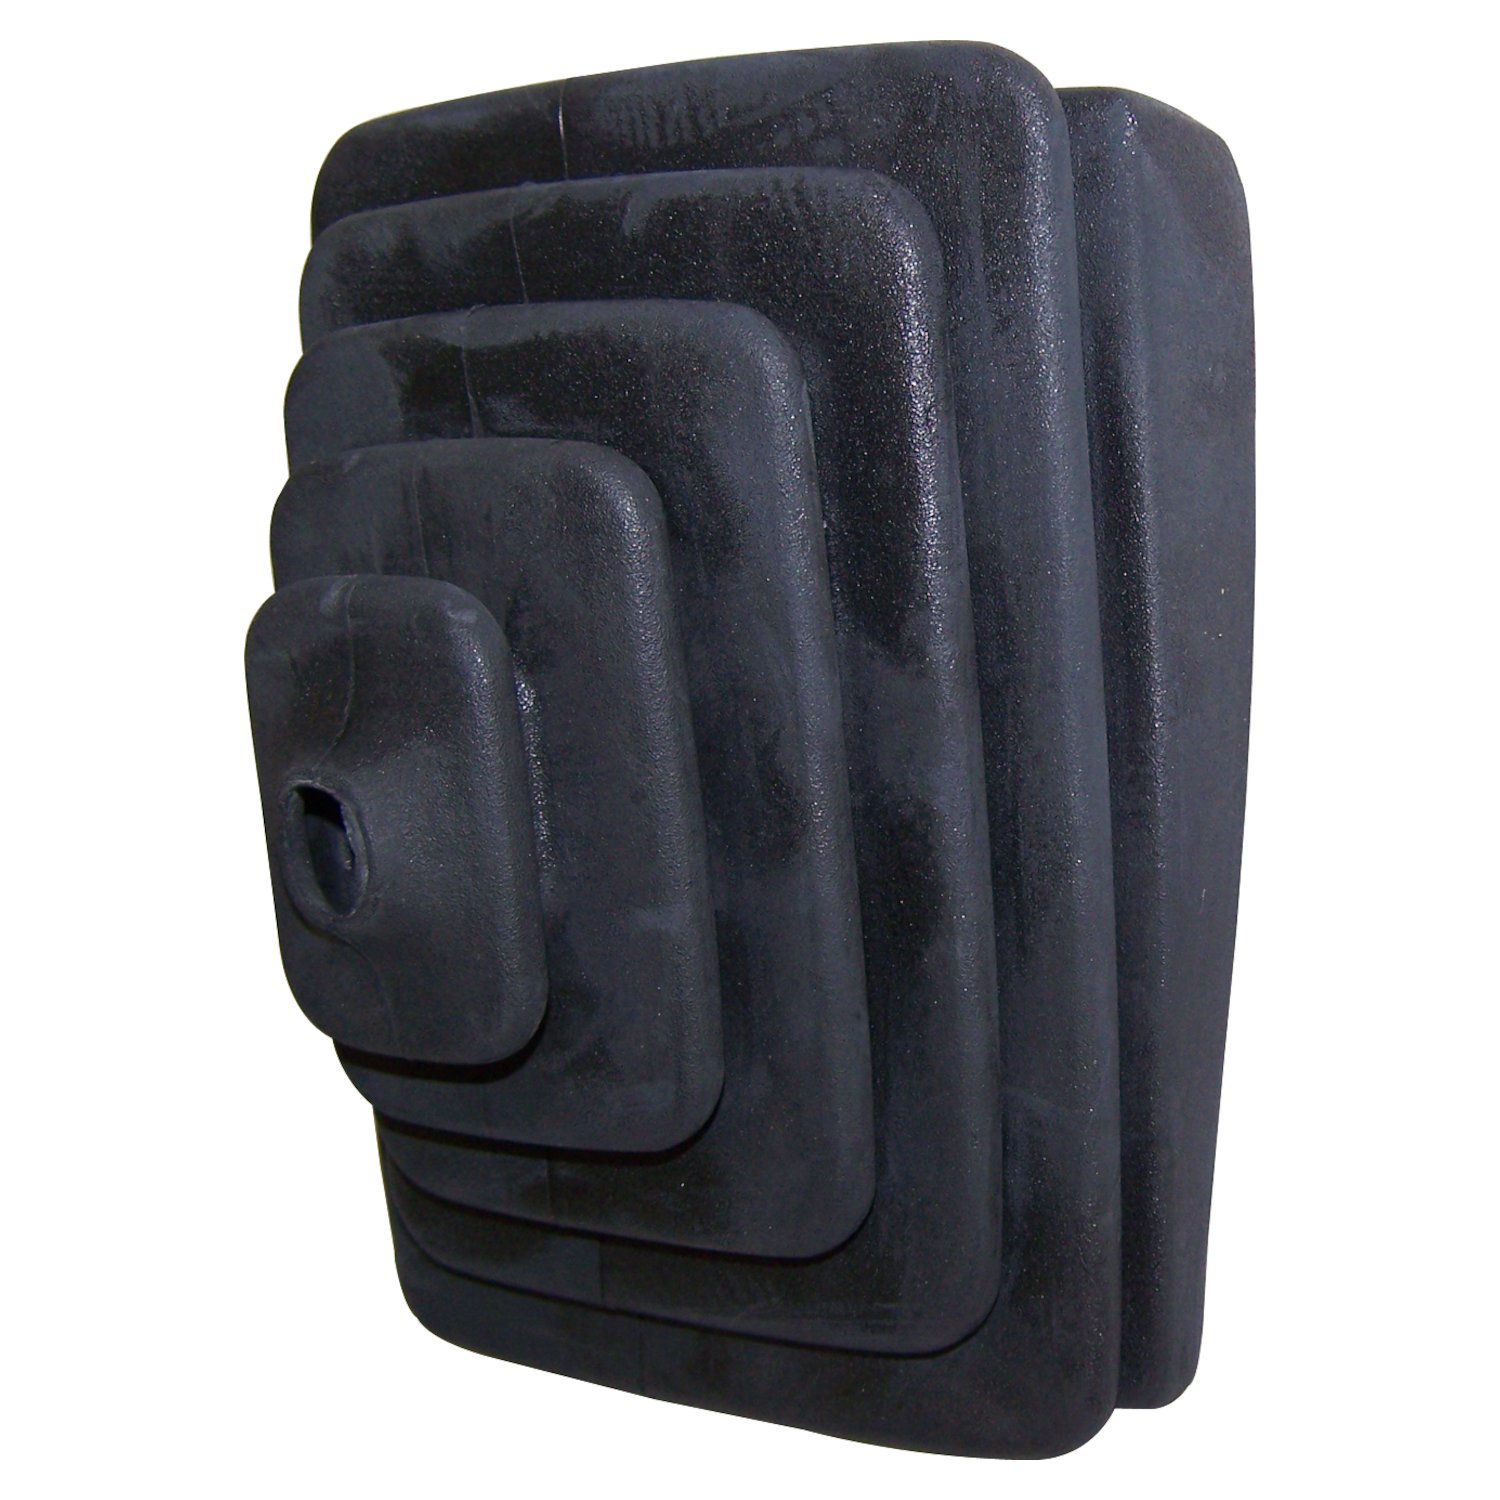 Outer Transmission Shift Boot for Various Jeep Vehicles